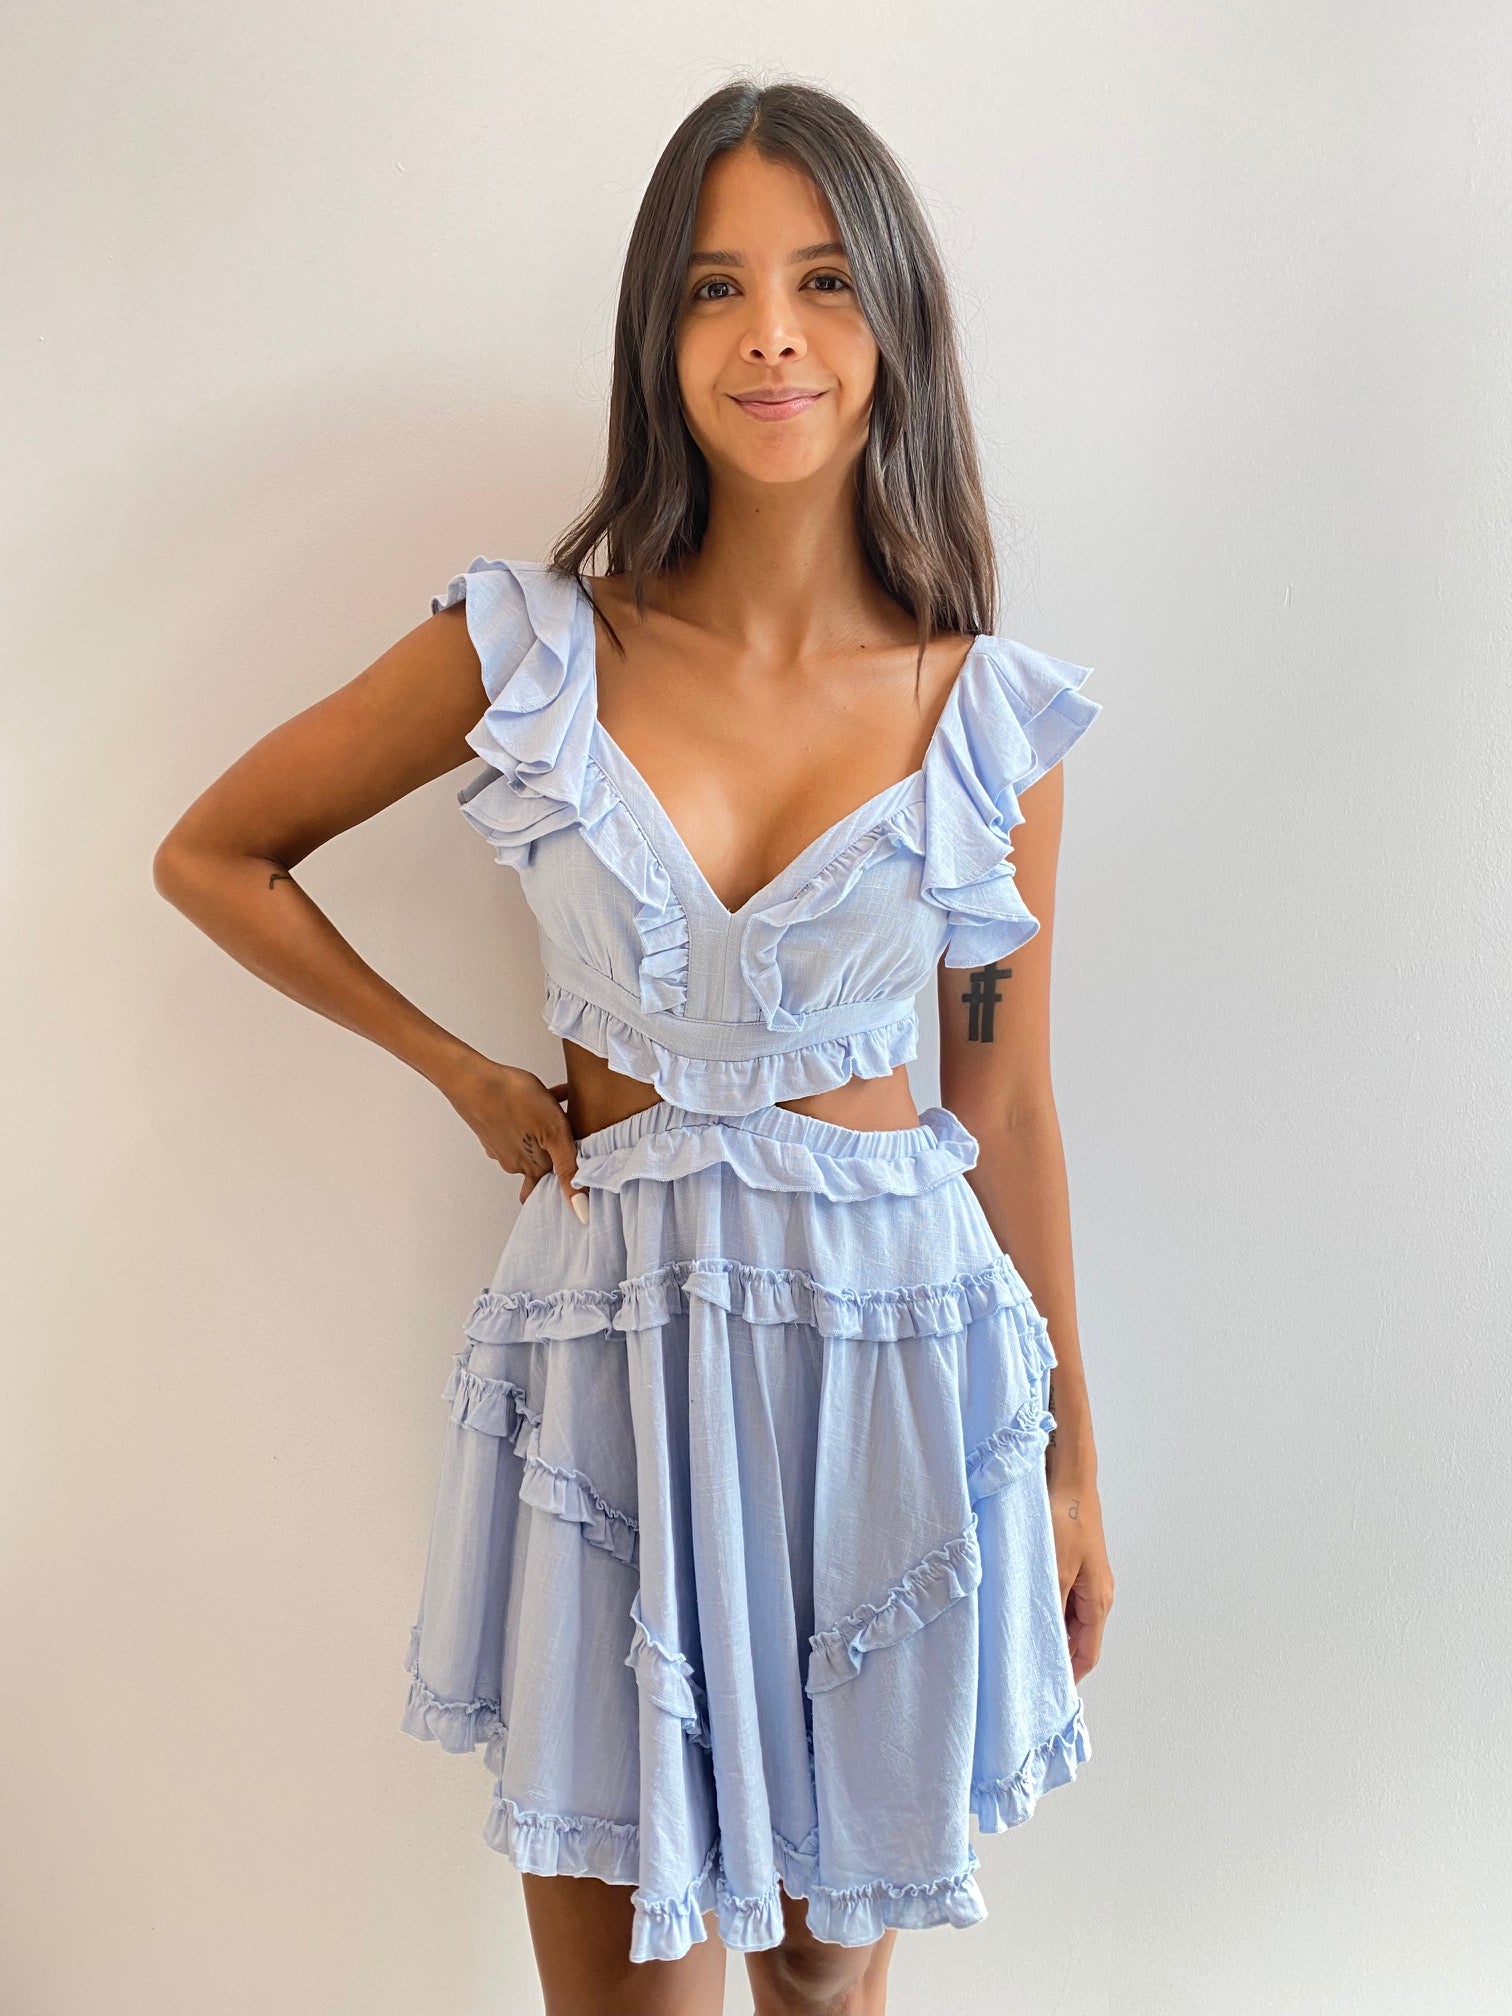 Elegant Summer Light Blue V-Neck Ruffle Cut-Out Back Tie-Up Dress with Band Sleeve Detailed